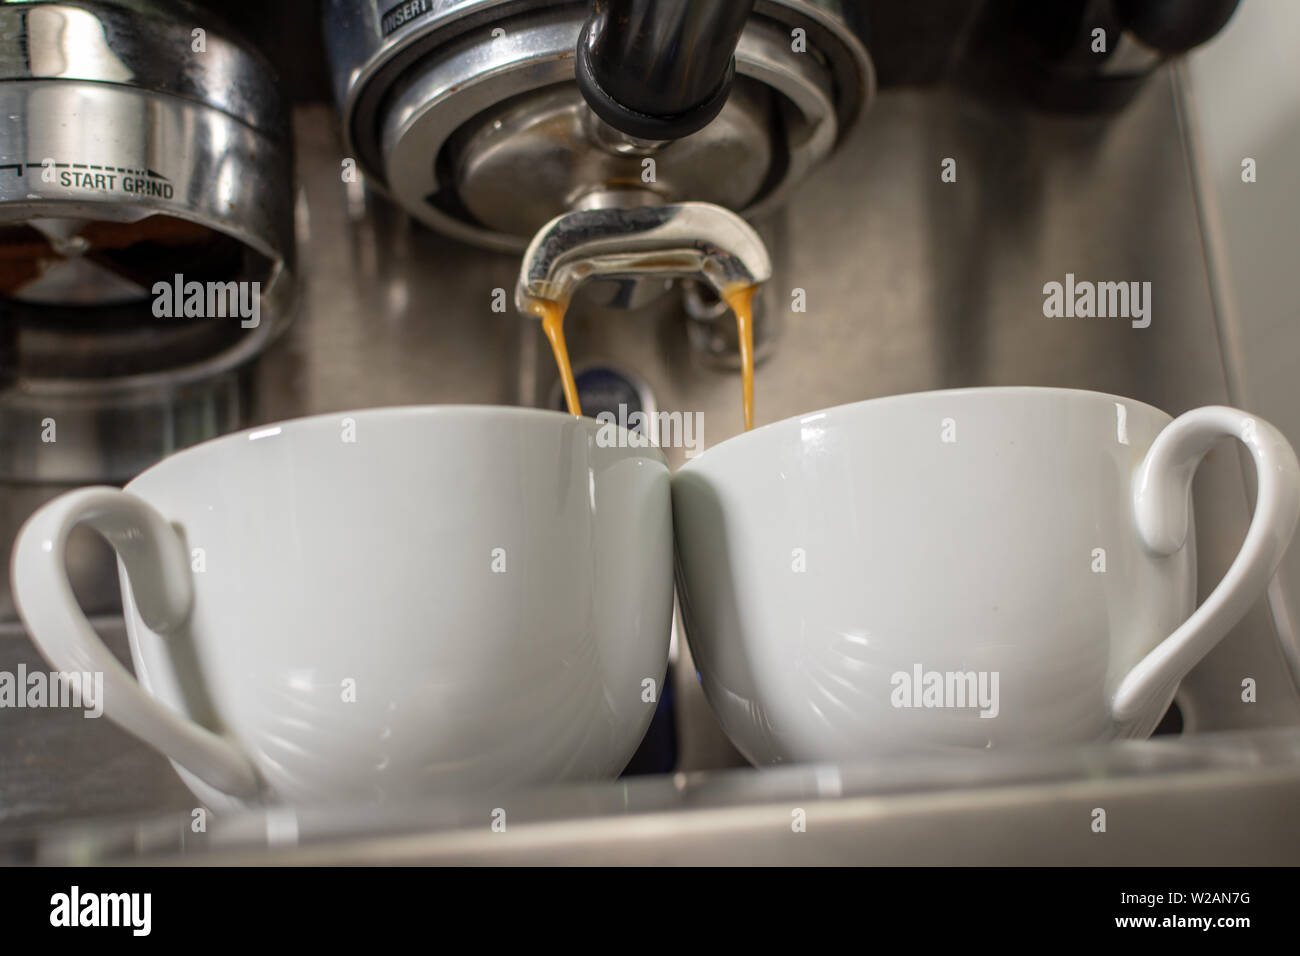 Coffee Machine Extracting Coffee into Two Cups Stock Photo